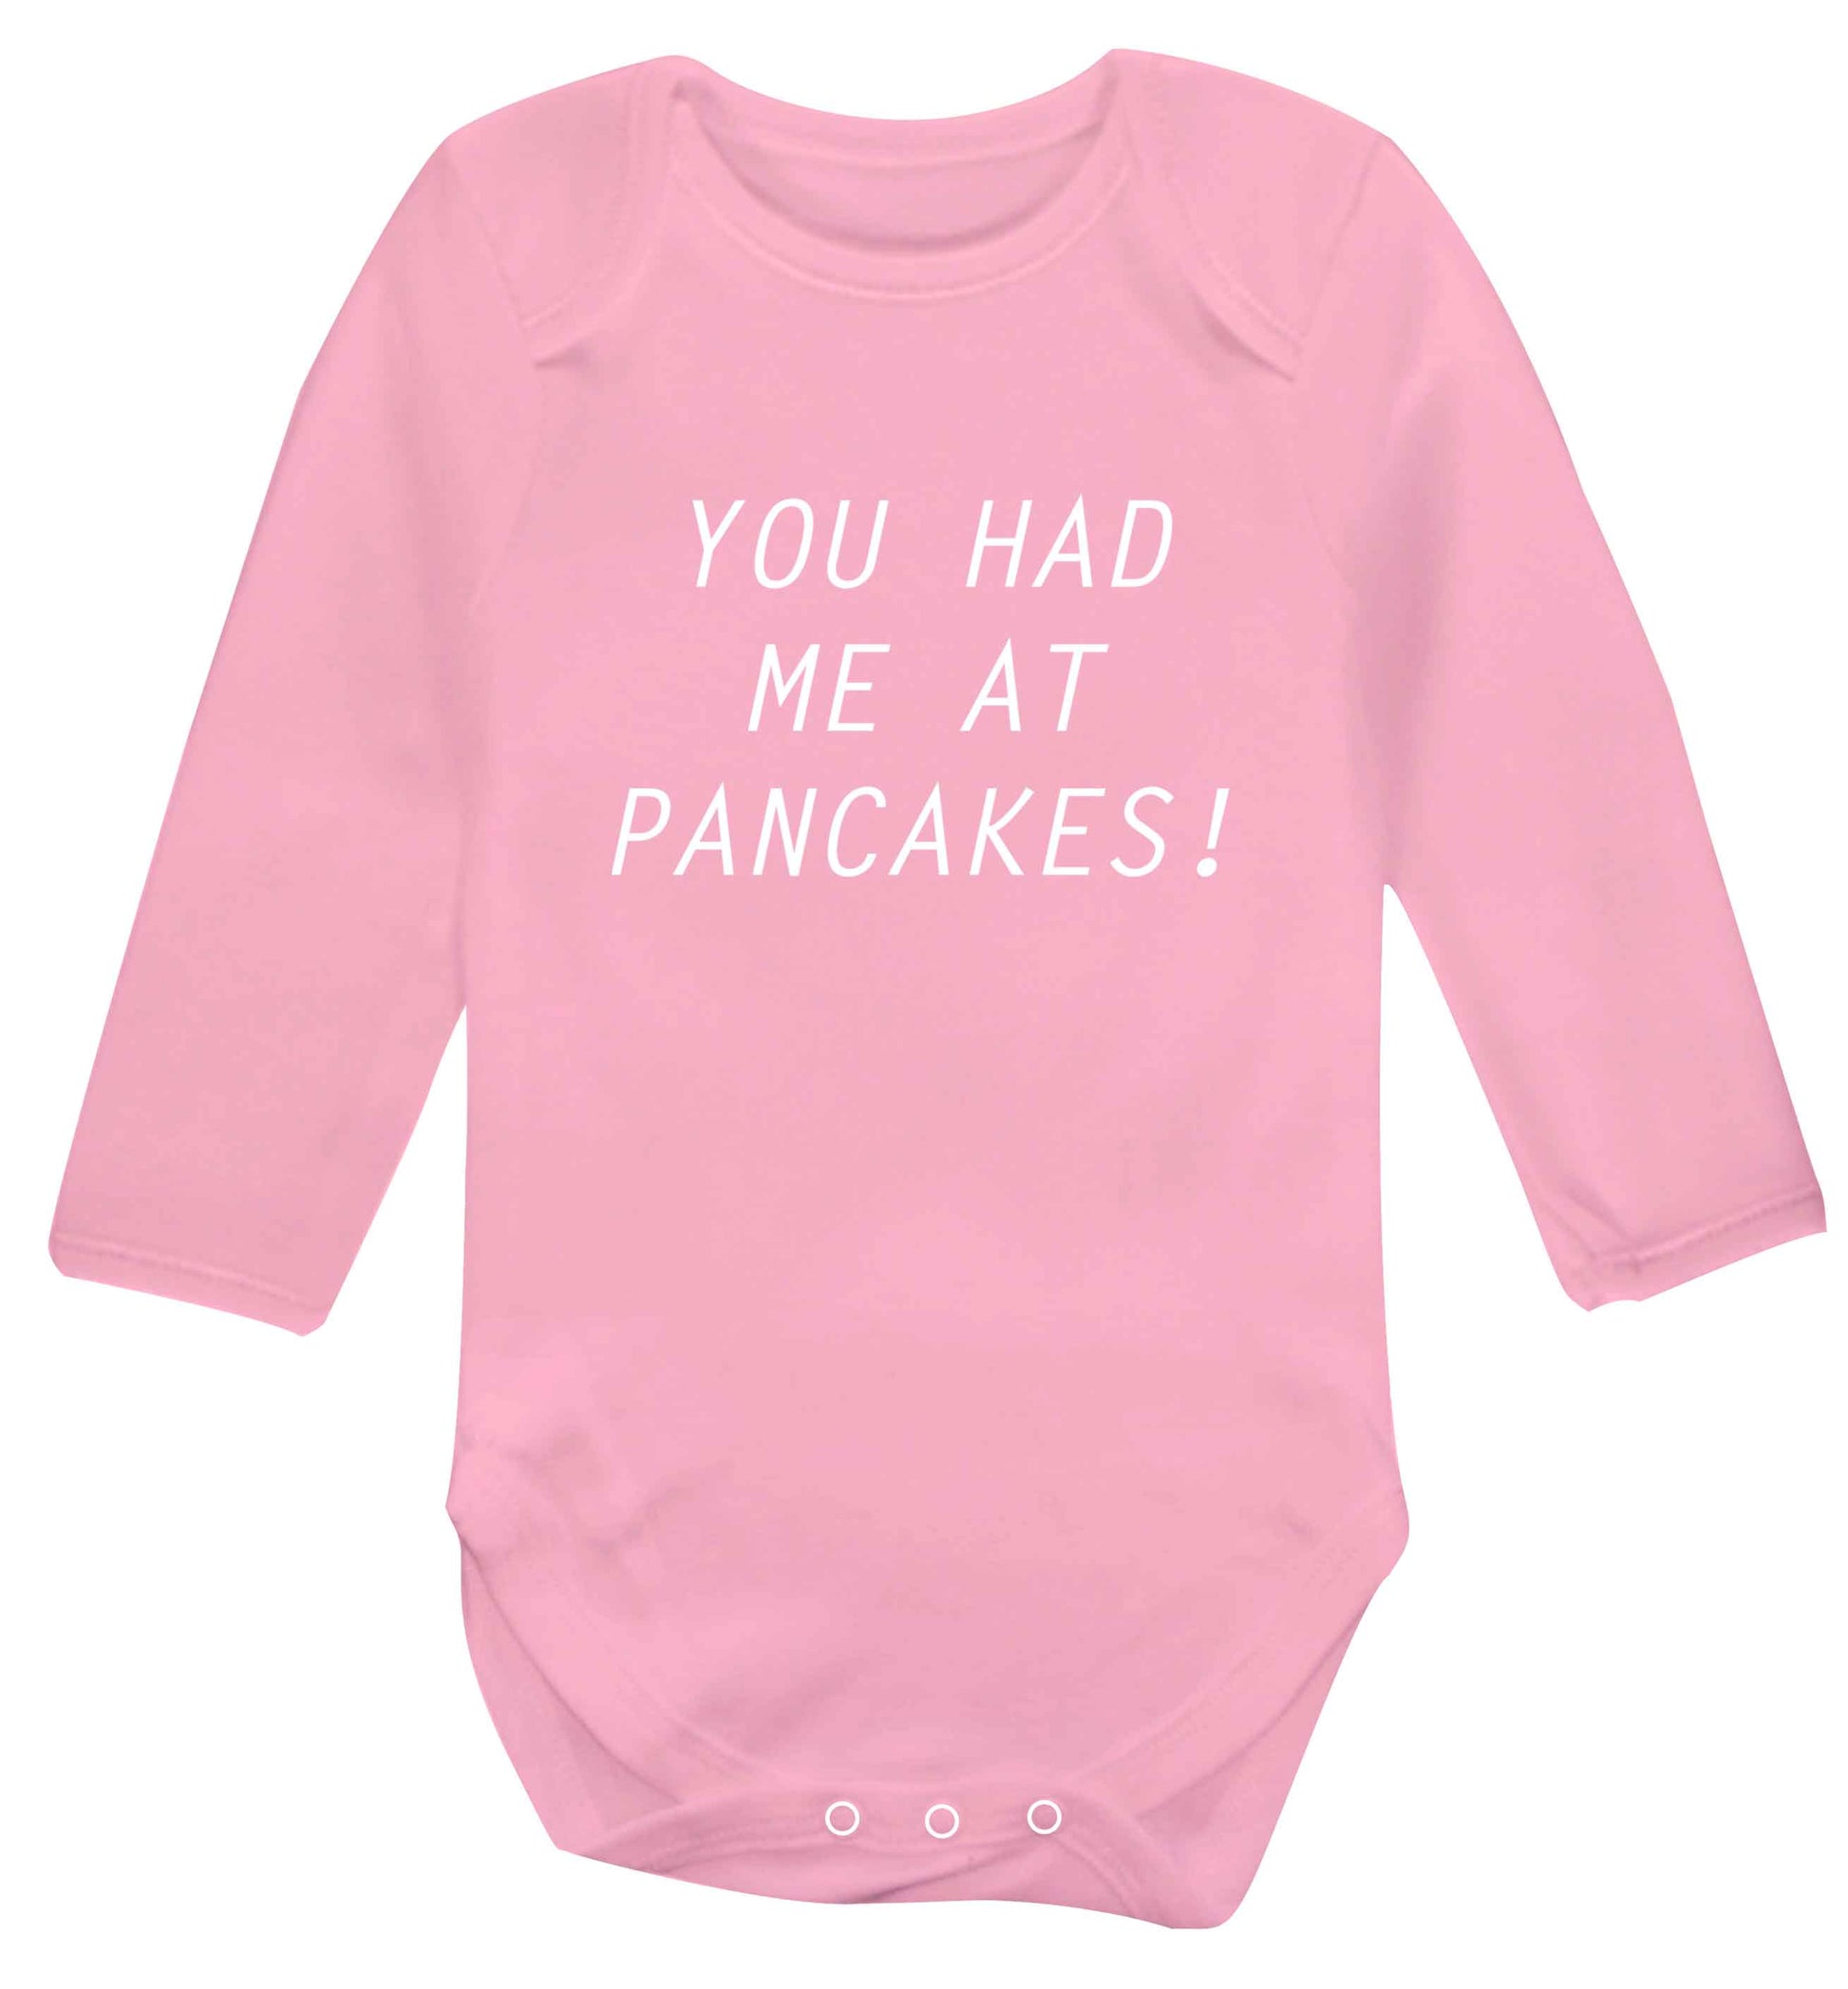 You had me at pancakes baby vest long sleeved pale pink 6-12 months